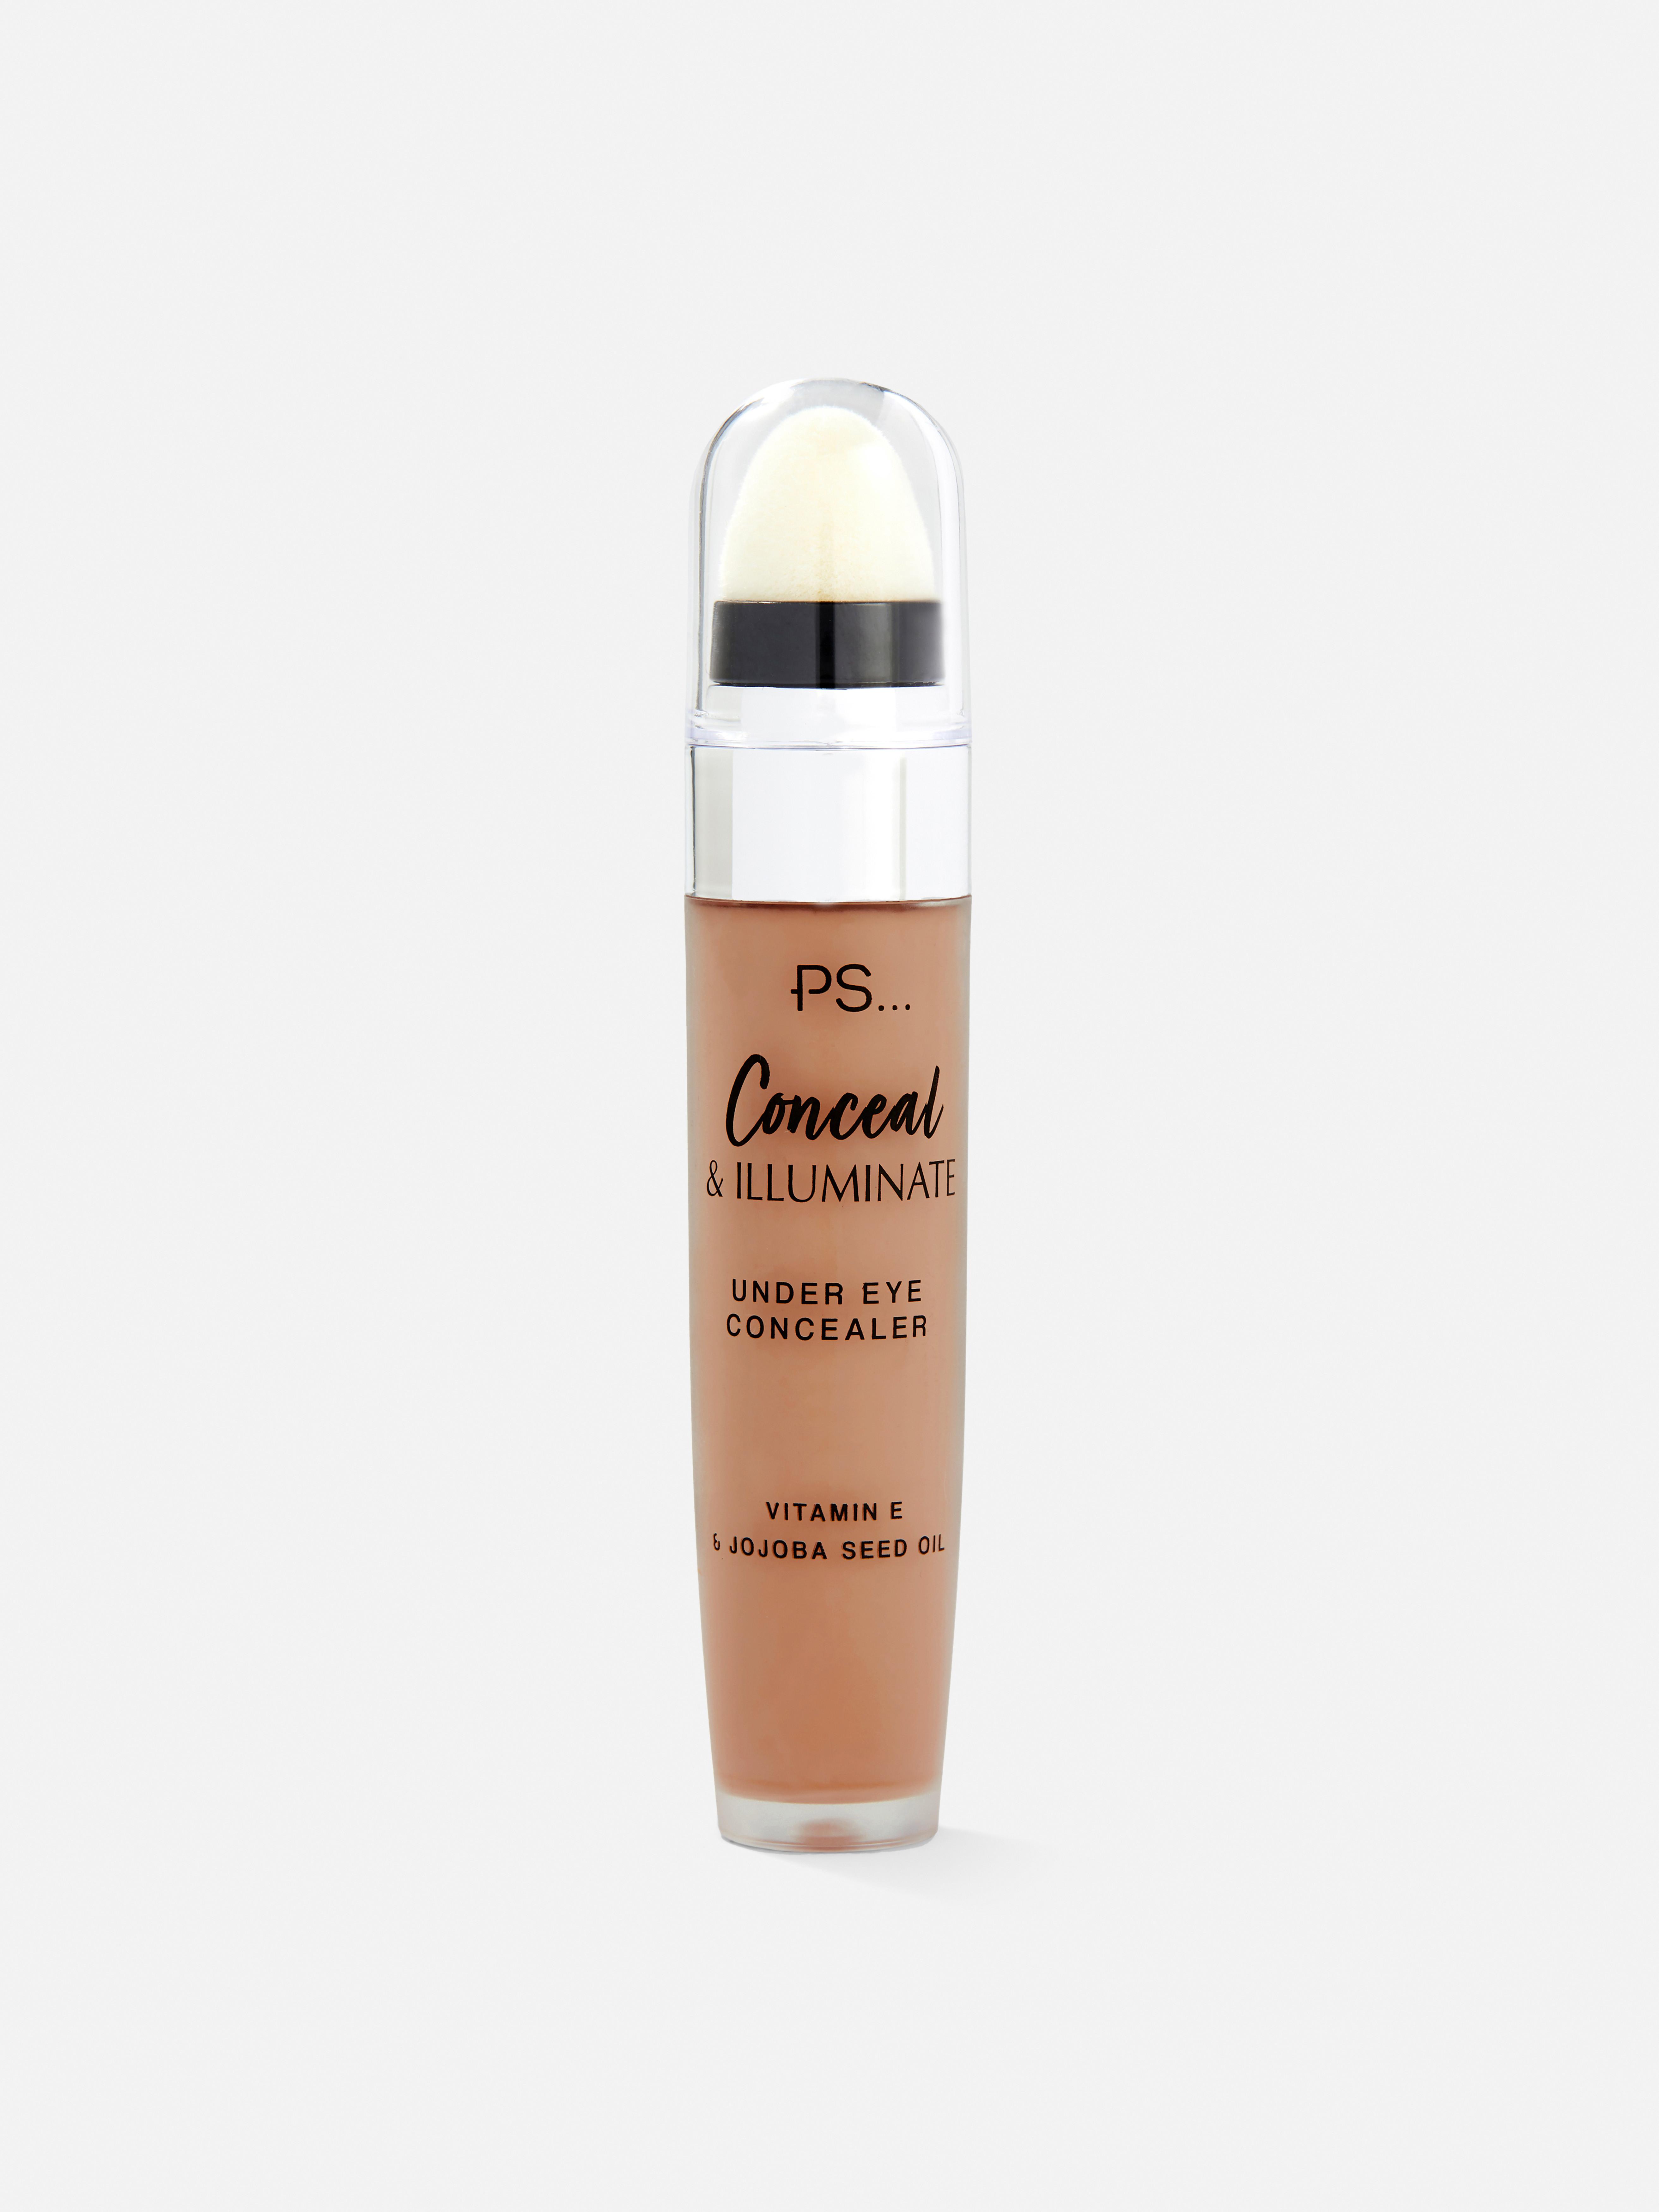 PS… Conceal and Illuminate Under Eye Concealer Black